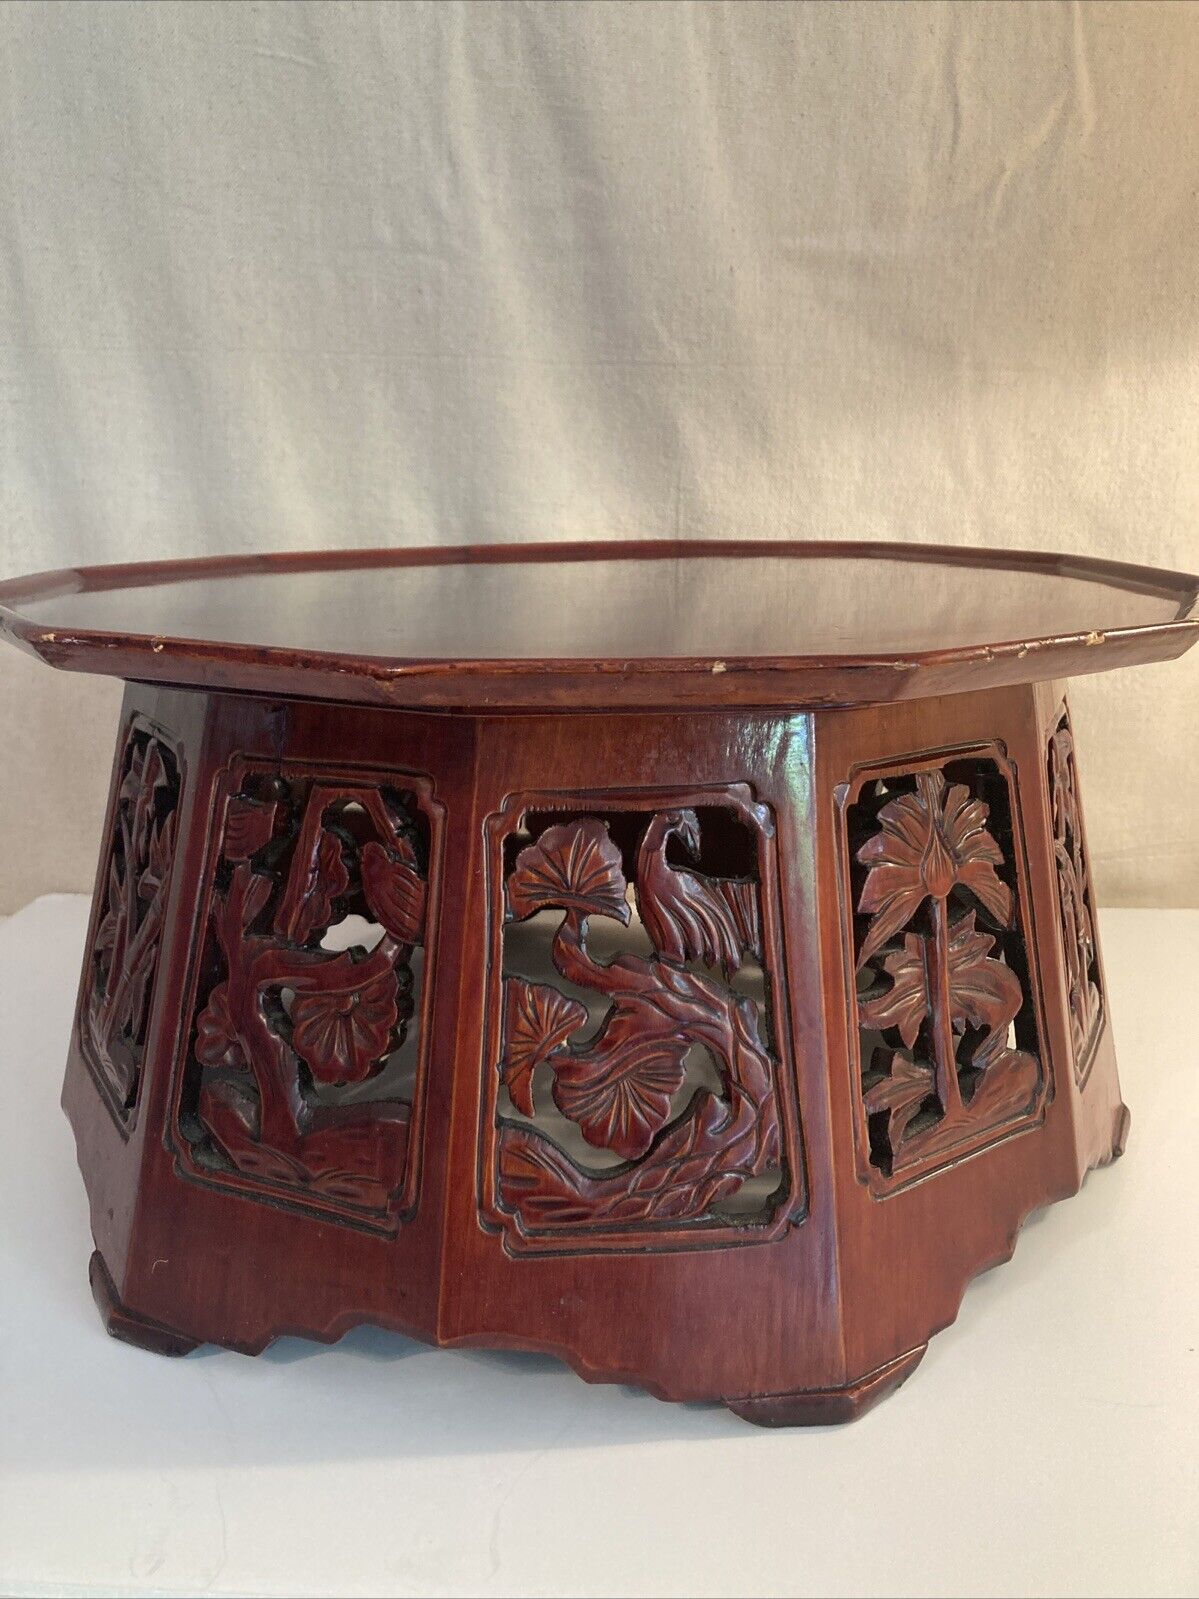 Vintage red brown lacquer low Asian octagonal tea or coffee table or plant stand